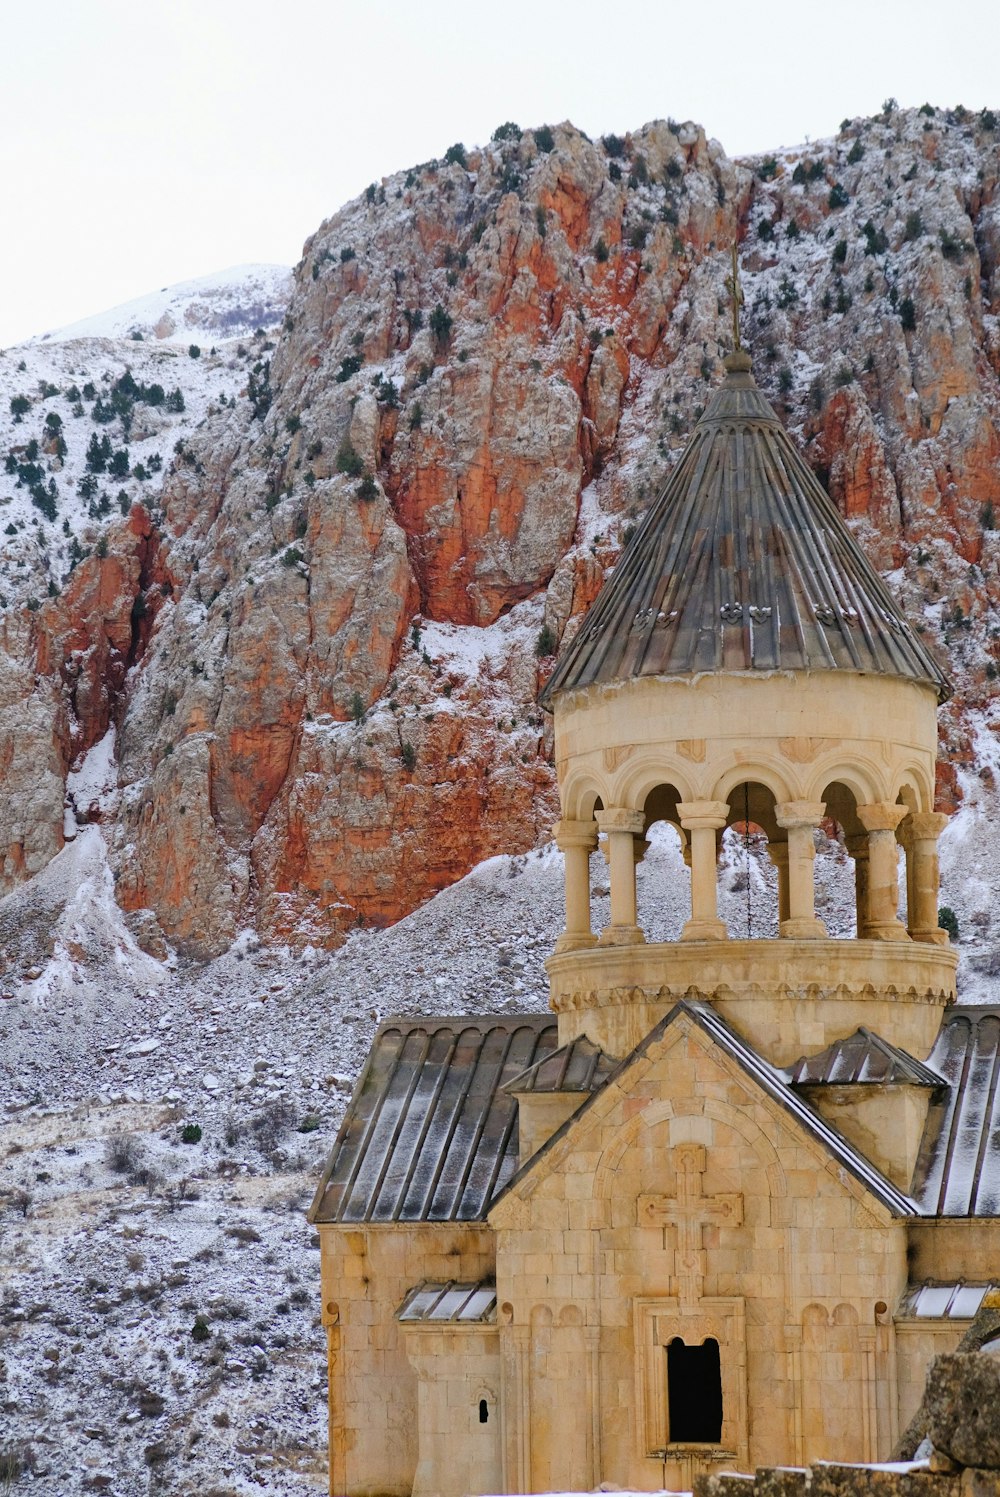 a church in the middle of a snowy mountain